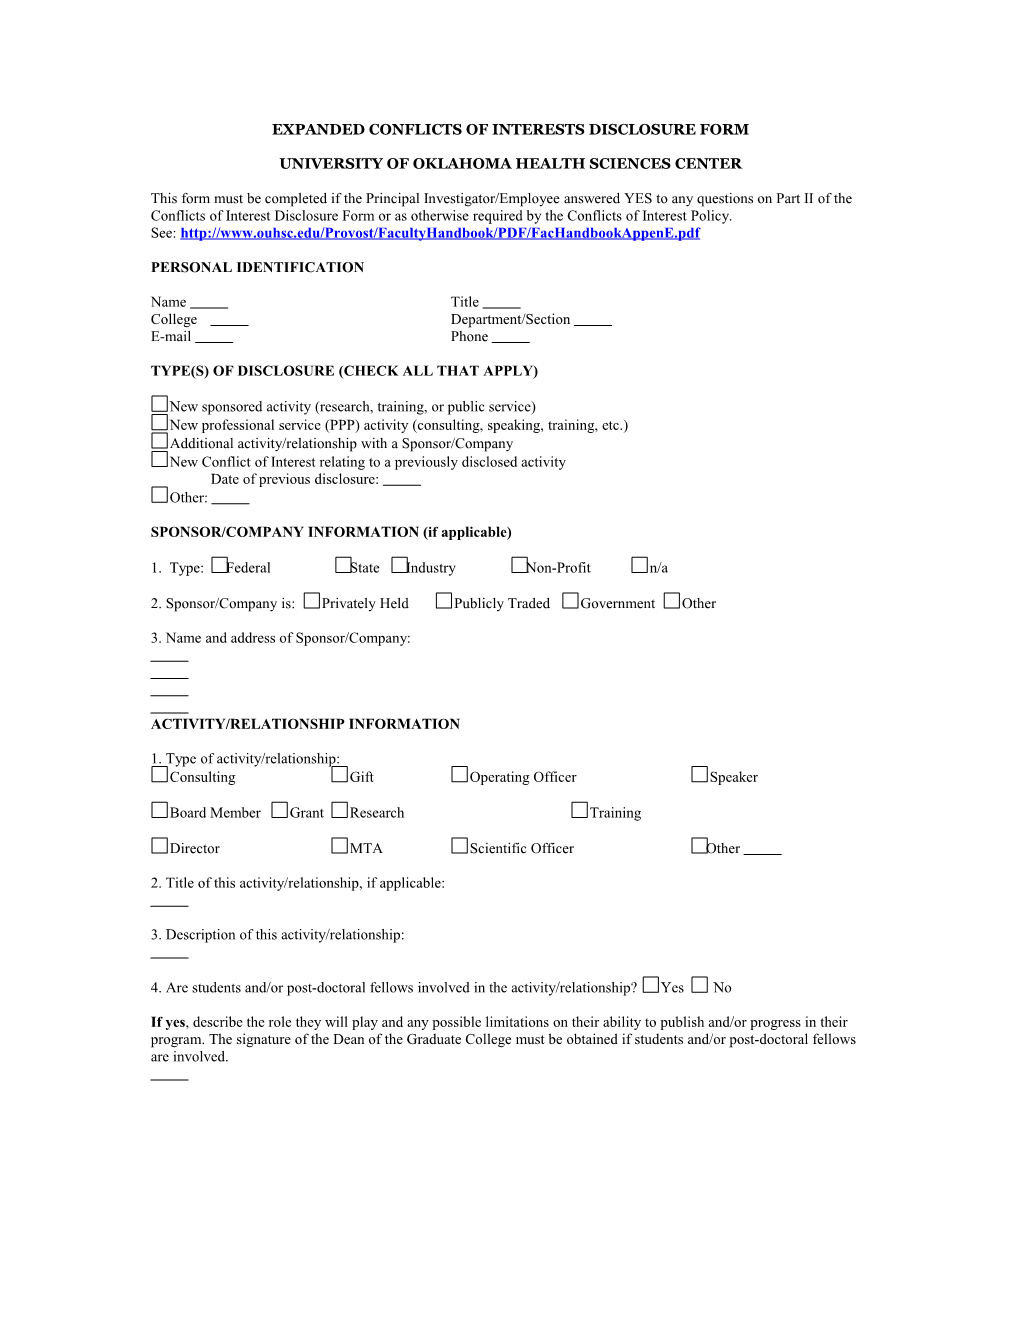 Conflicts of Interest Disclosure Form